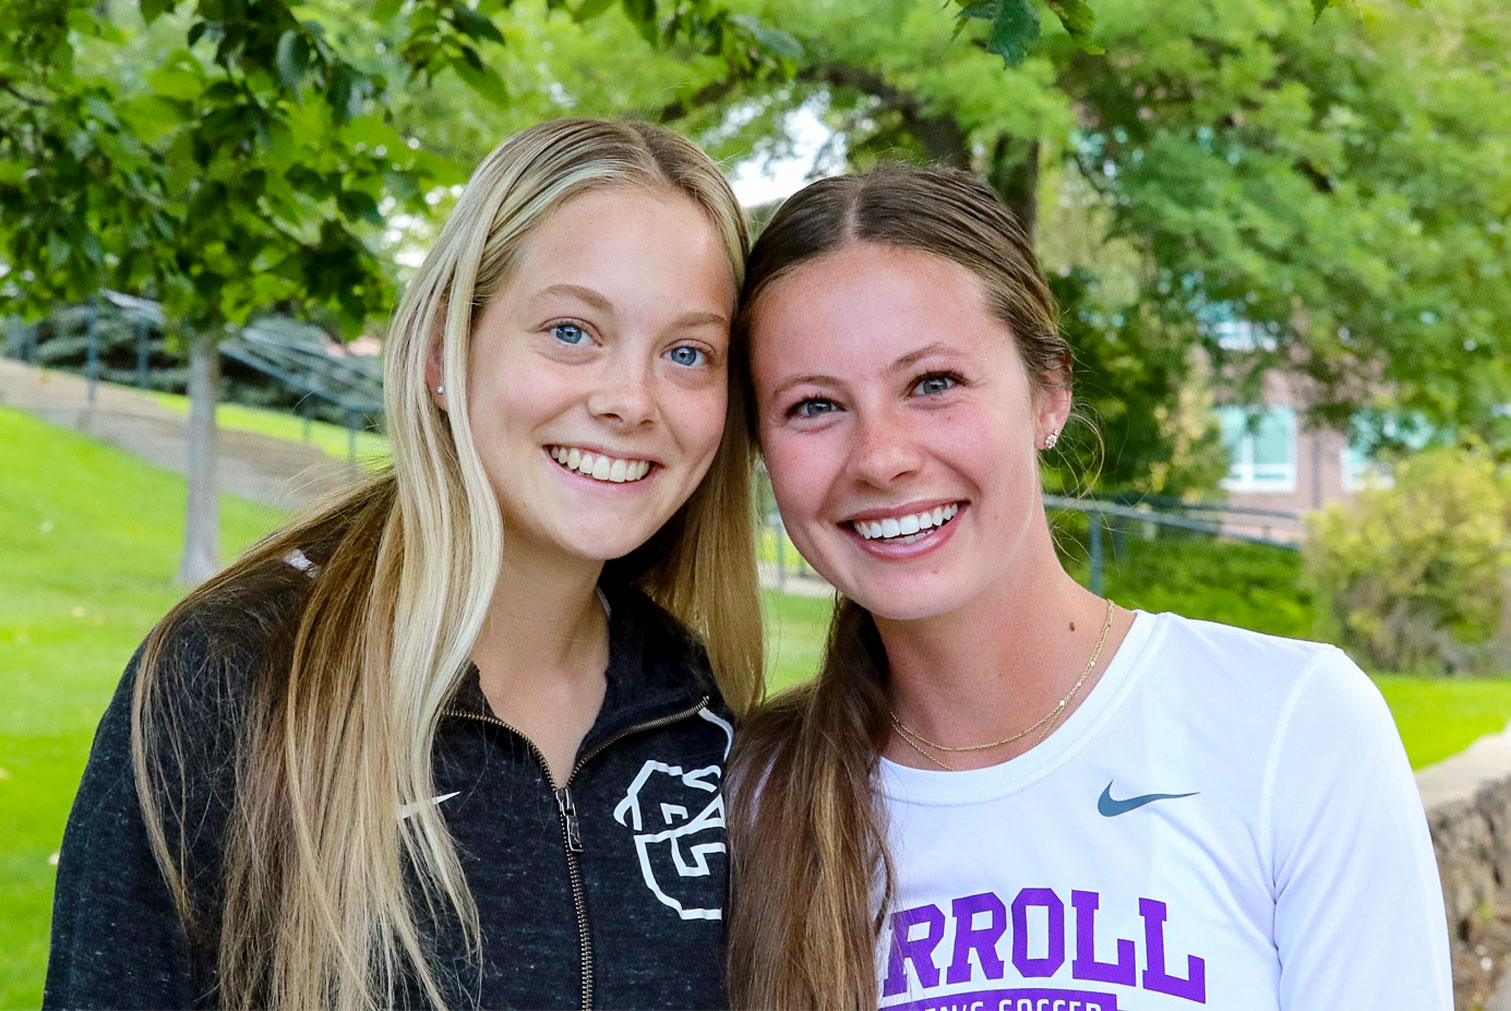 Two female Carroll students smiling